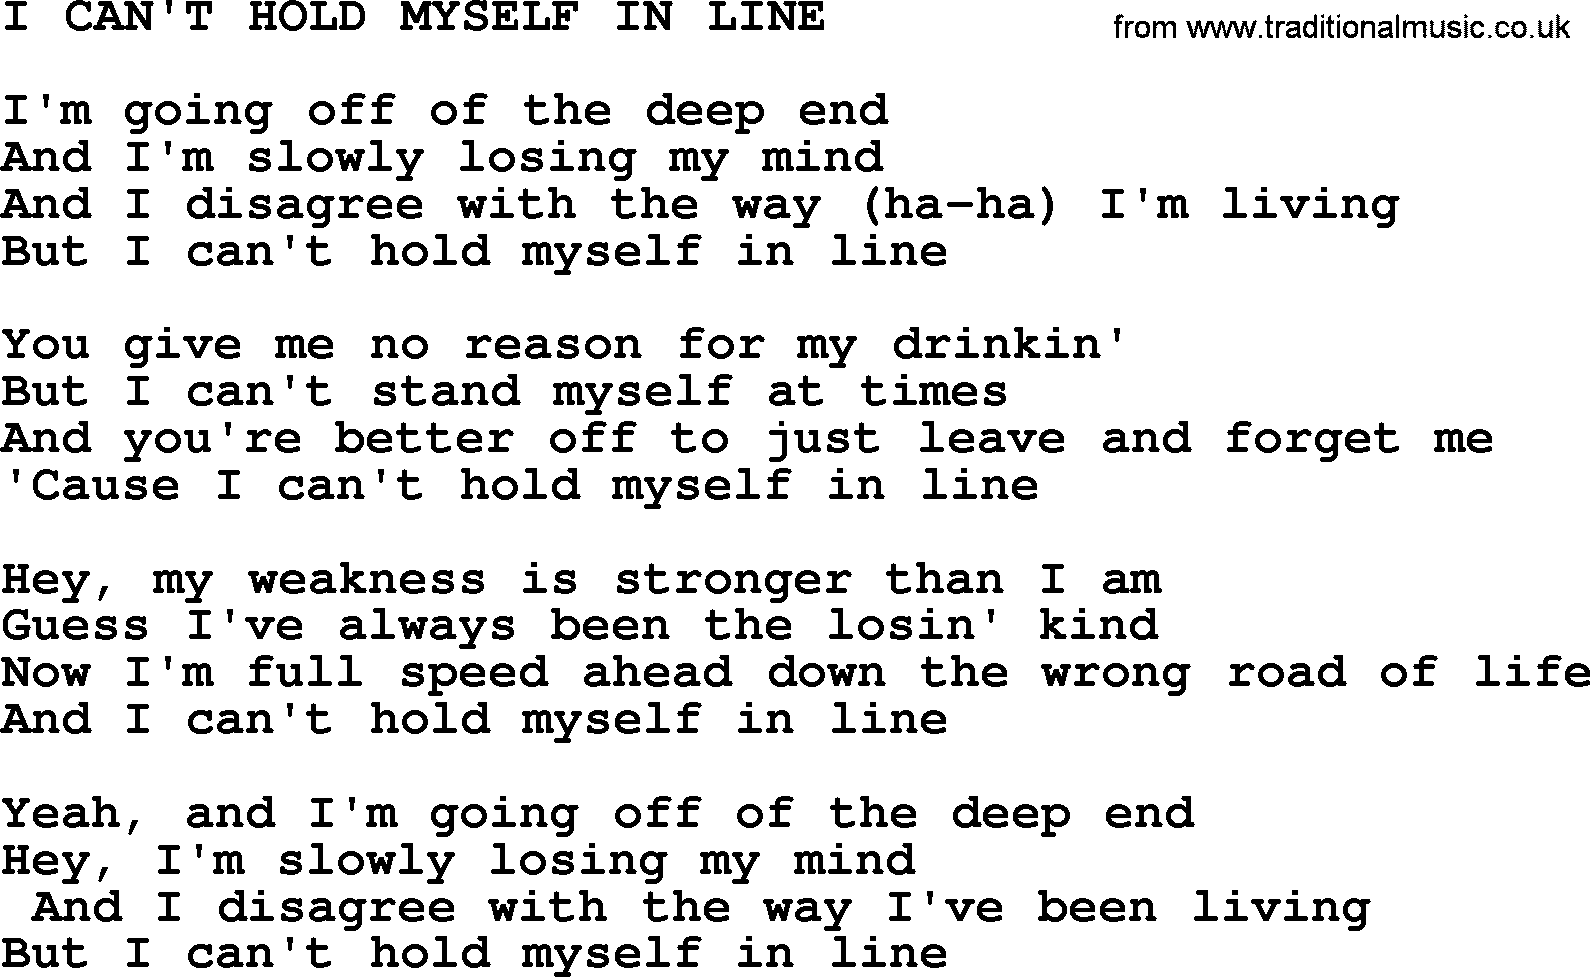 Merle Haggard song: I Can't Hold Myself In Line, lyrics.